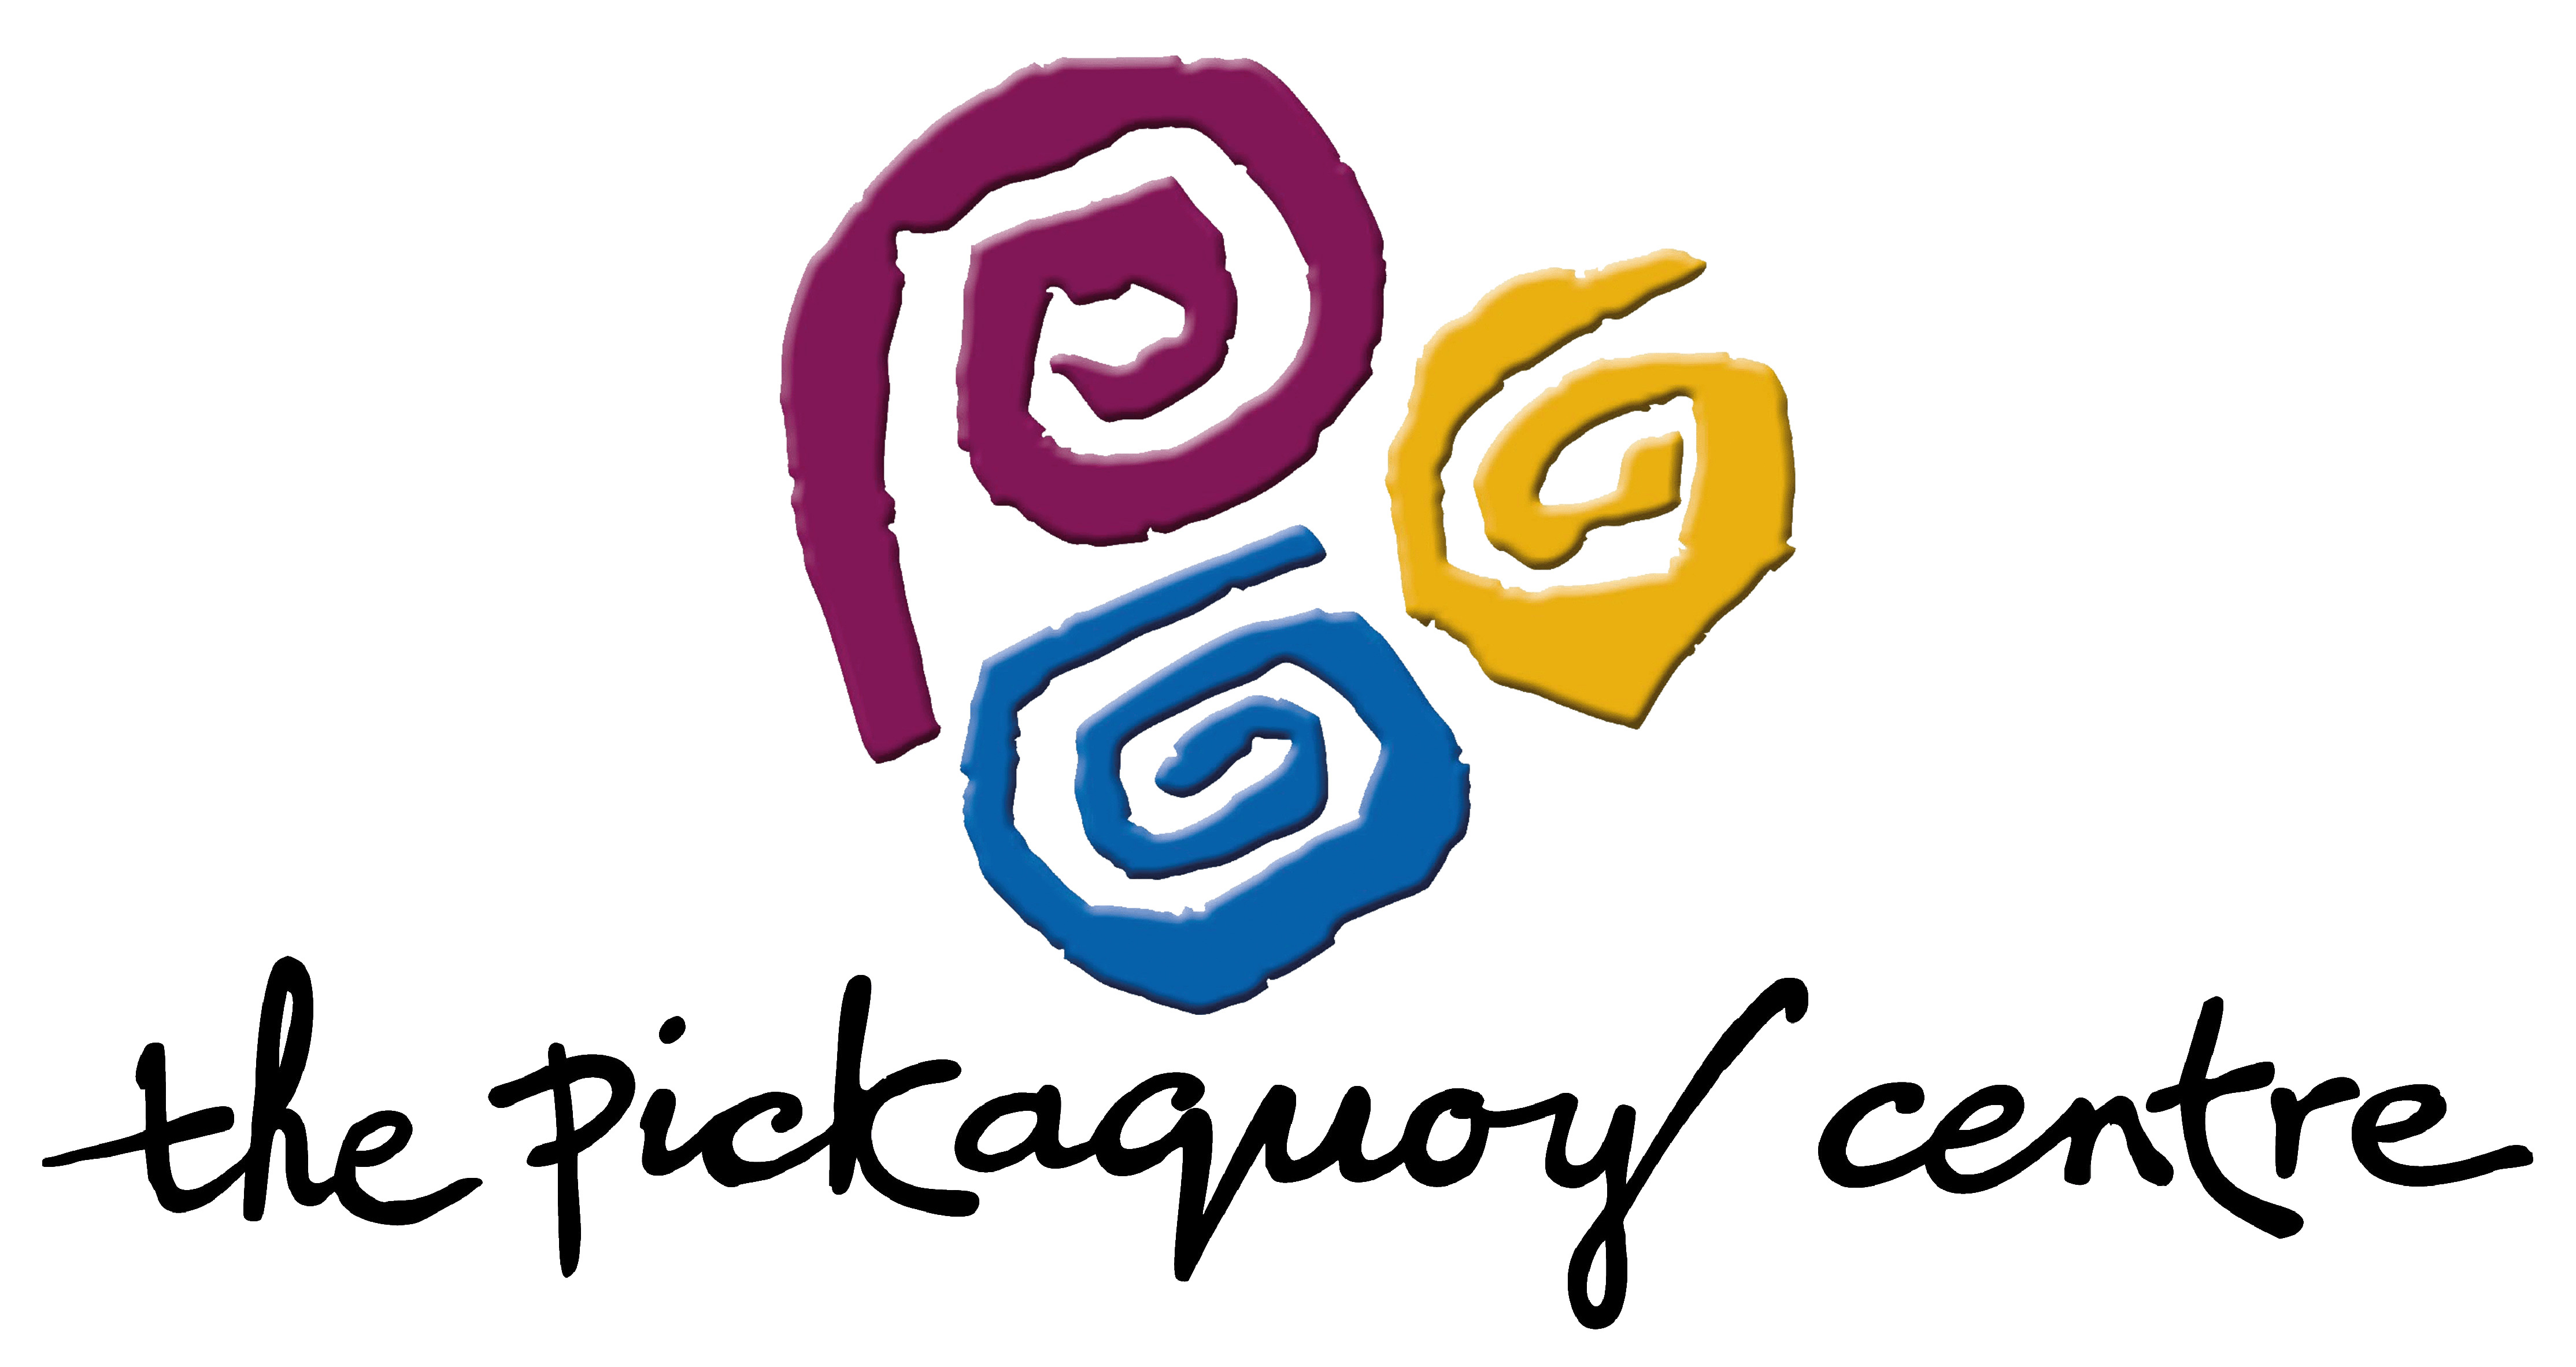 Job opportunity: Operations Manager, with The Pickaquoy Centre